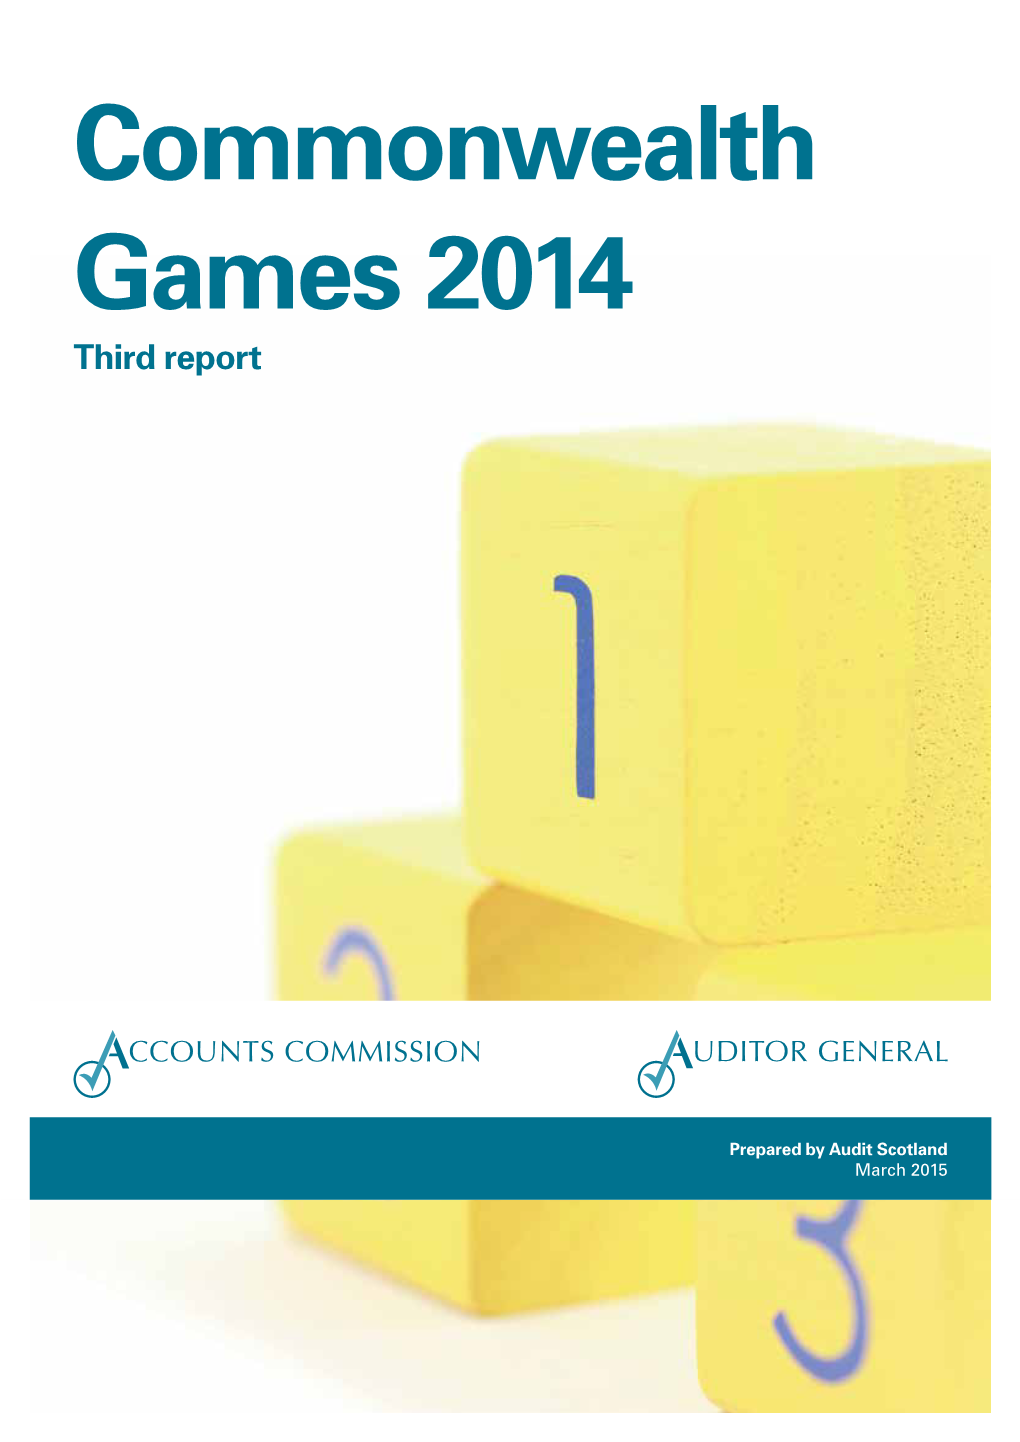 Commonwealth Games 2014 Third Report